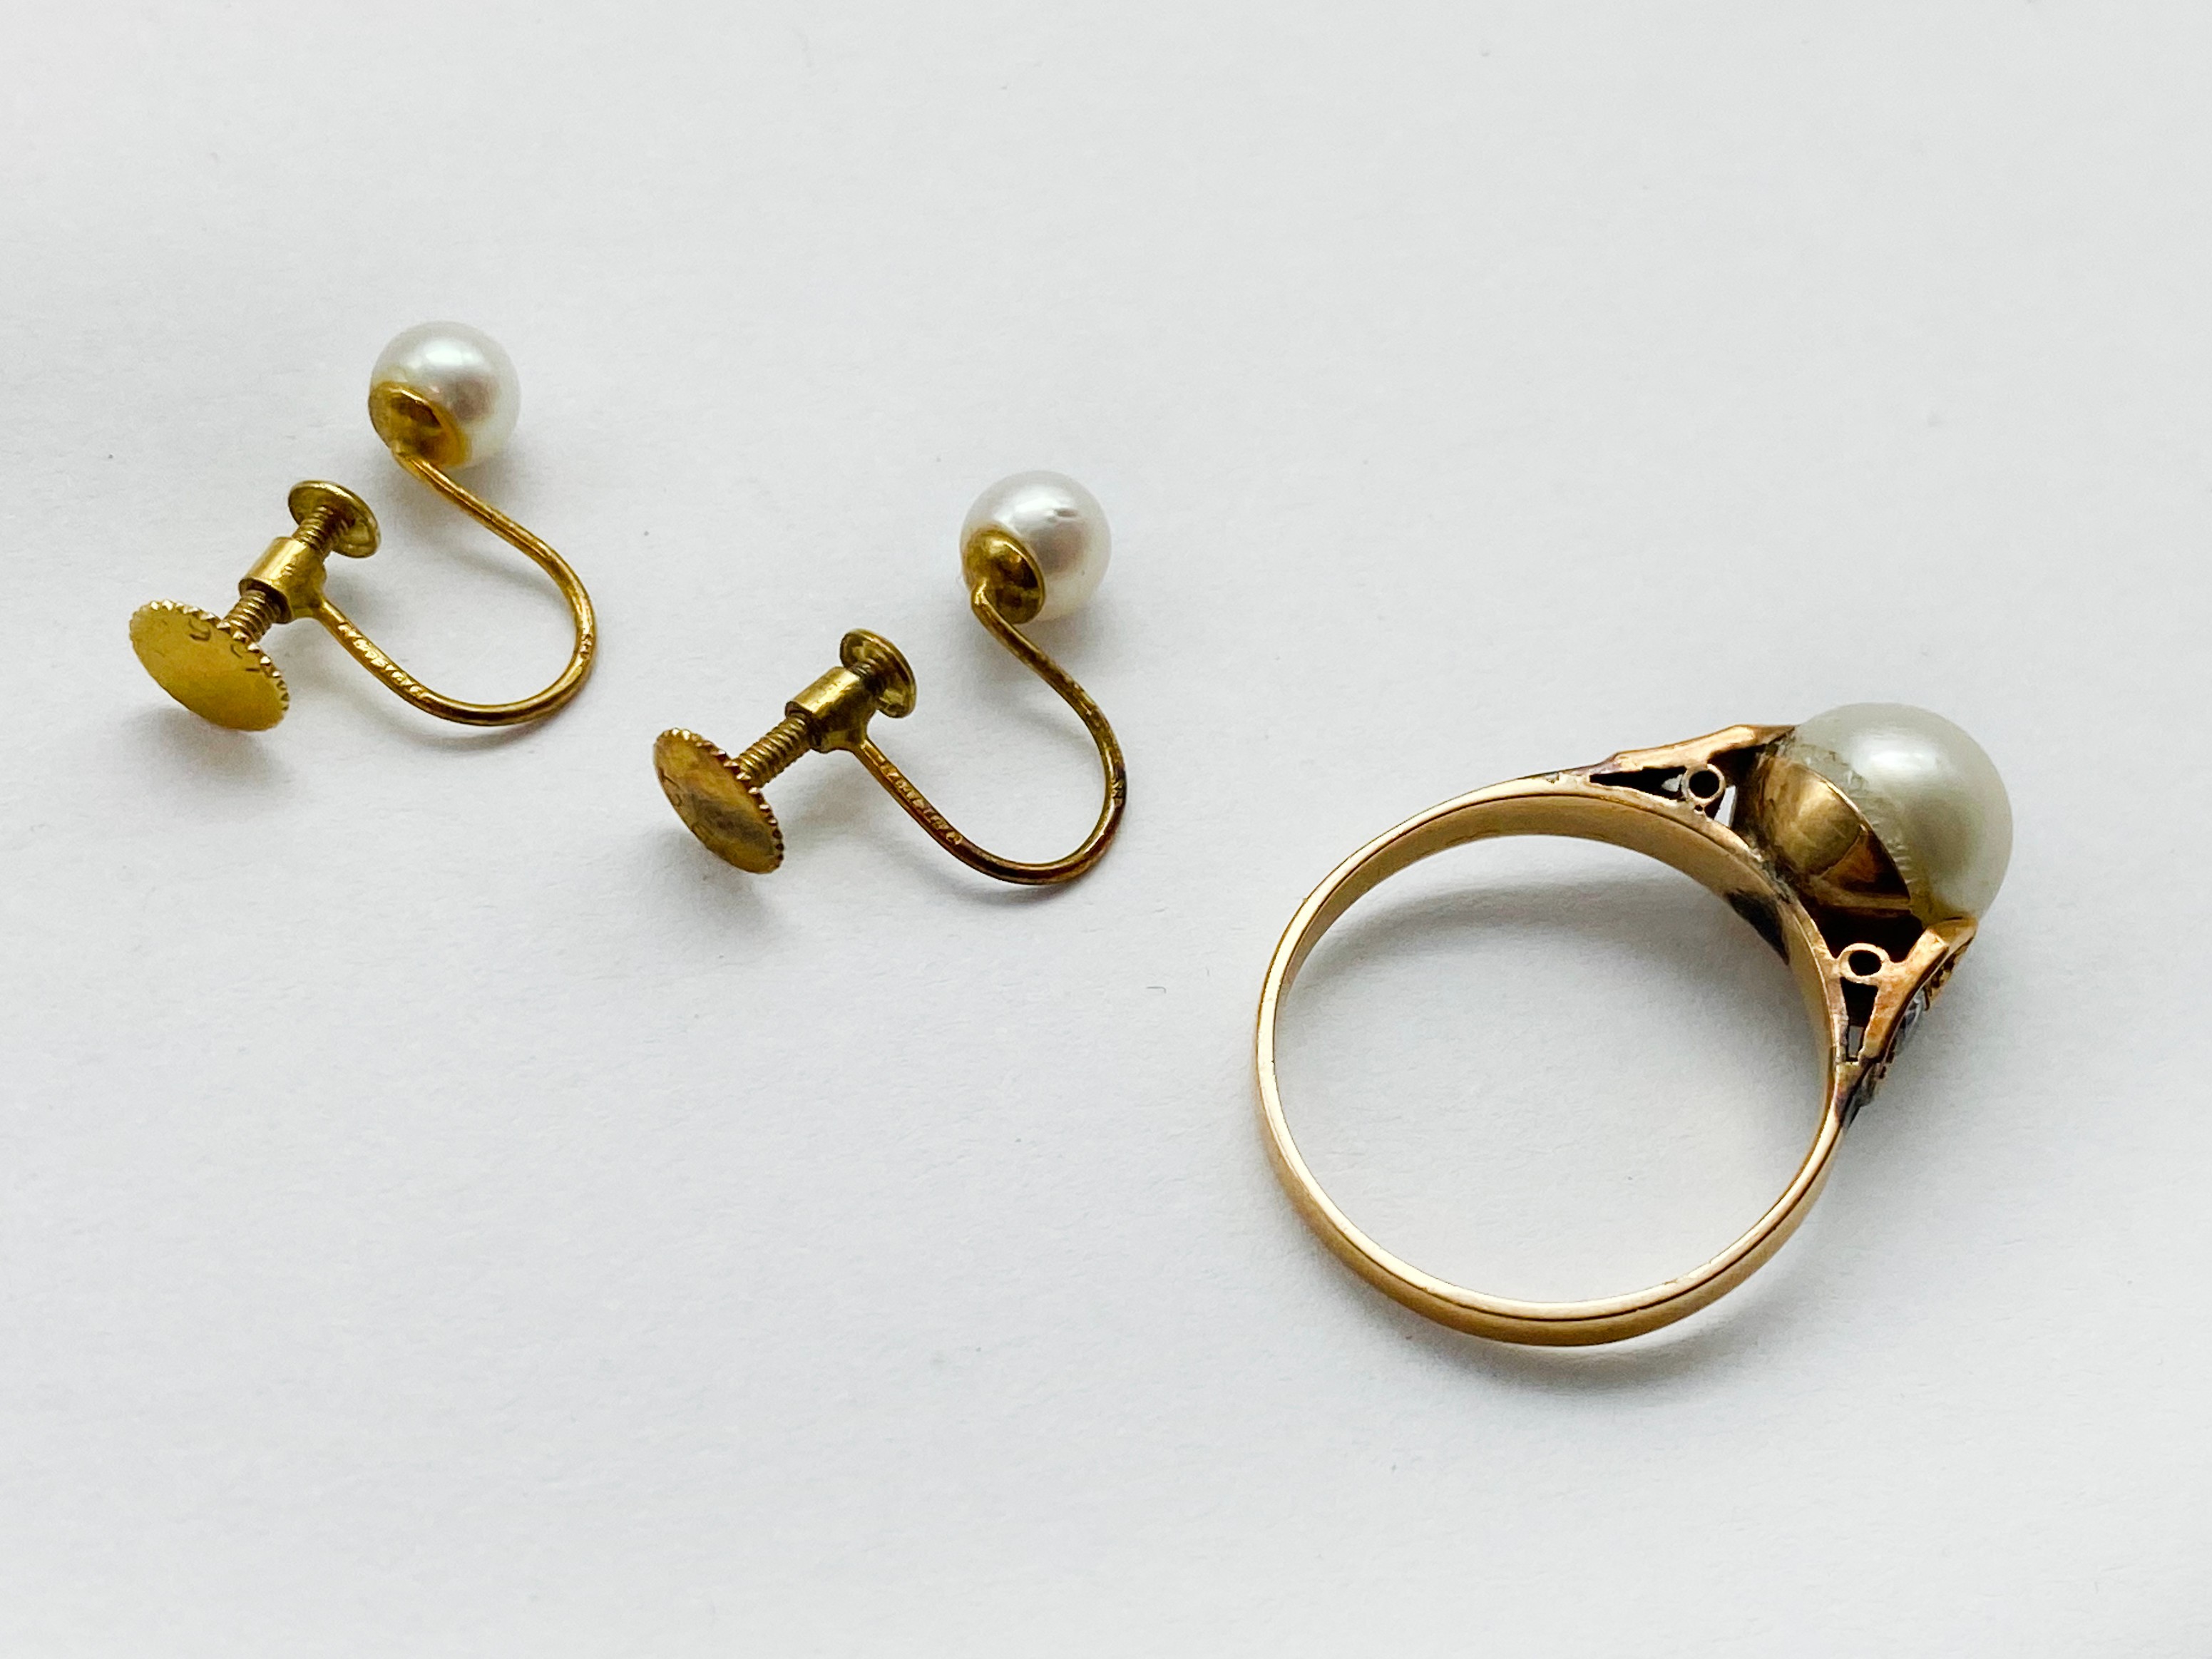 9CT GOLD PEARL & DIAMOND RING AND 9CT GOLD EARRINGS - Image 2 of 2